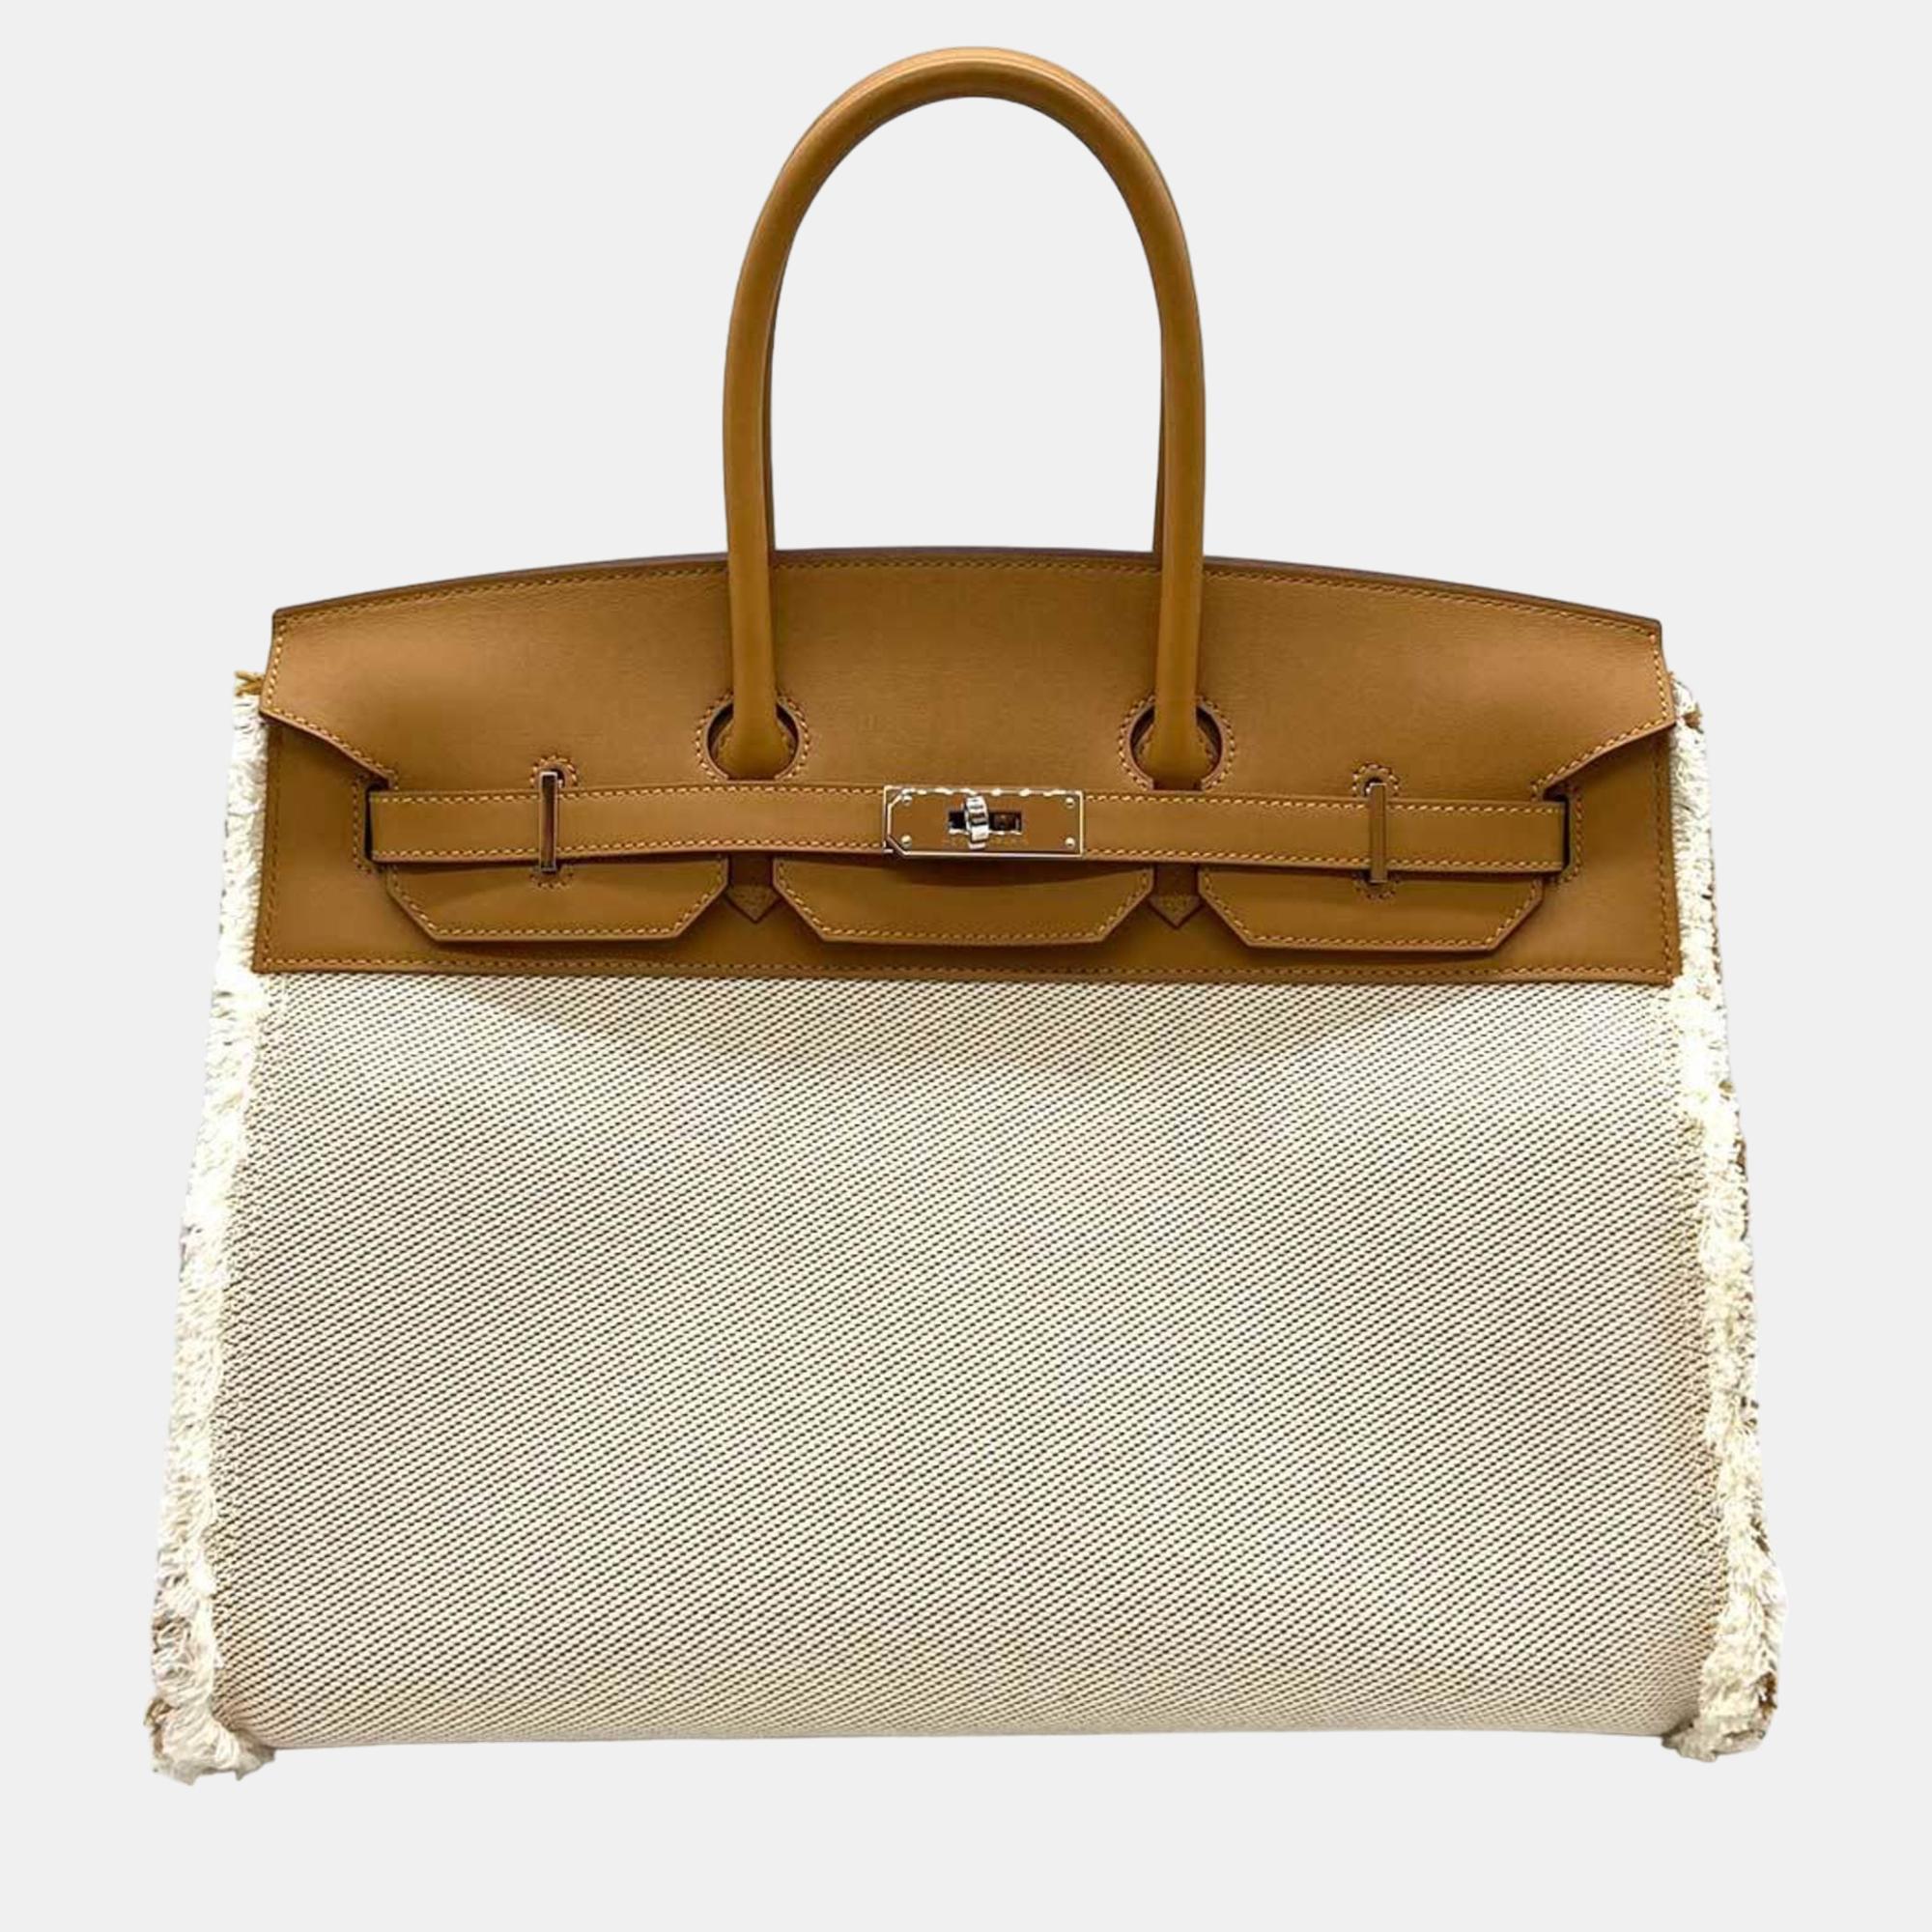 Hermes brown toile and swift leather fray birkin 35 bag